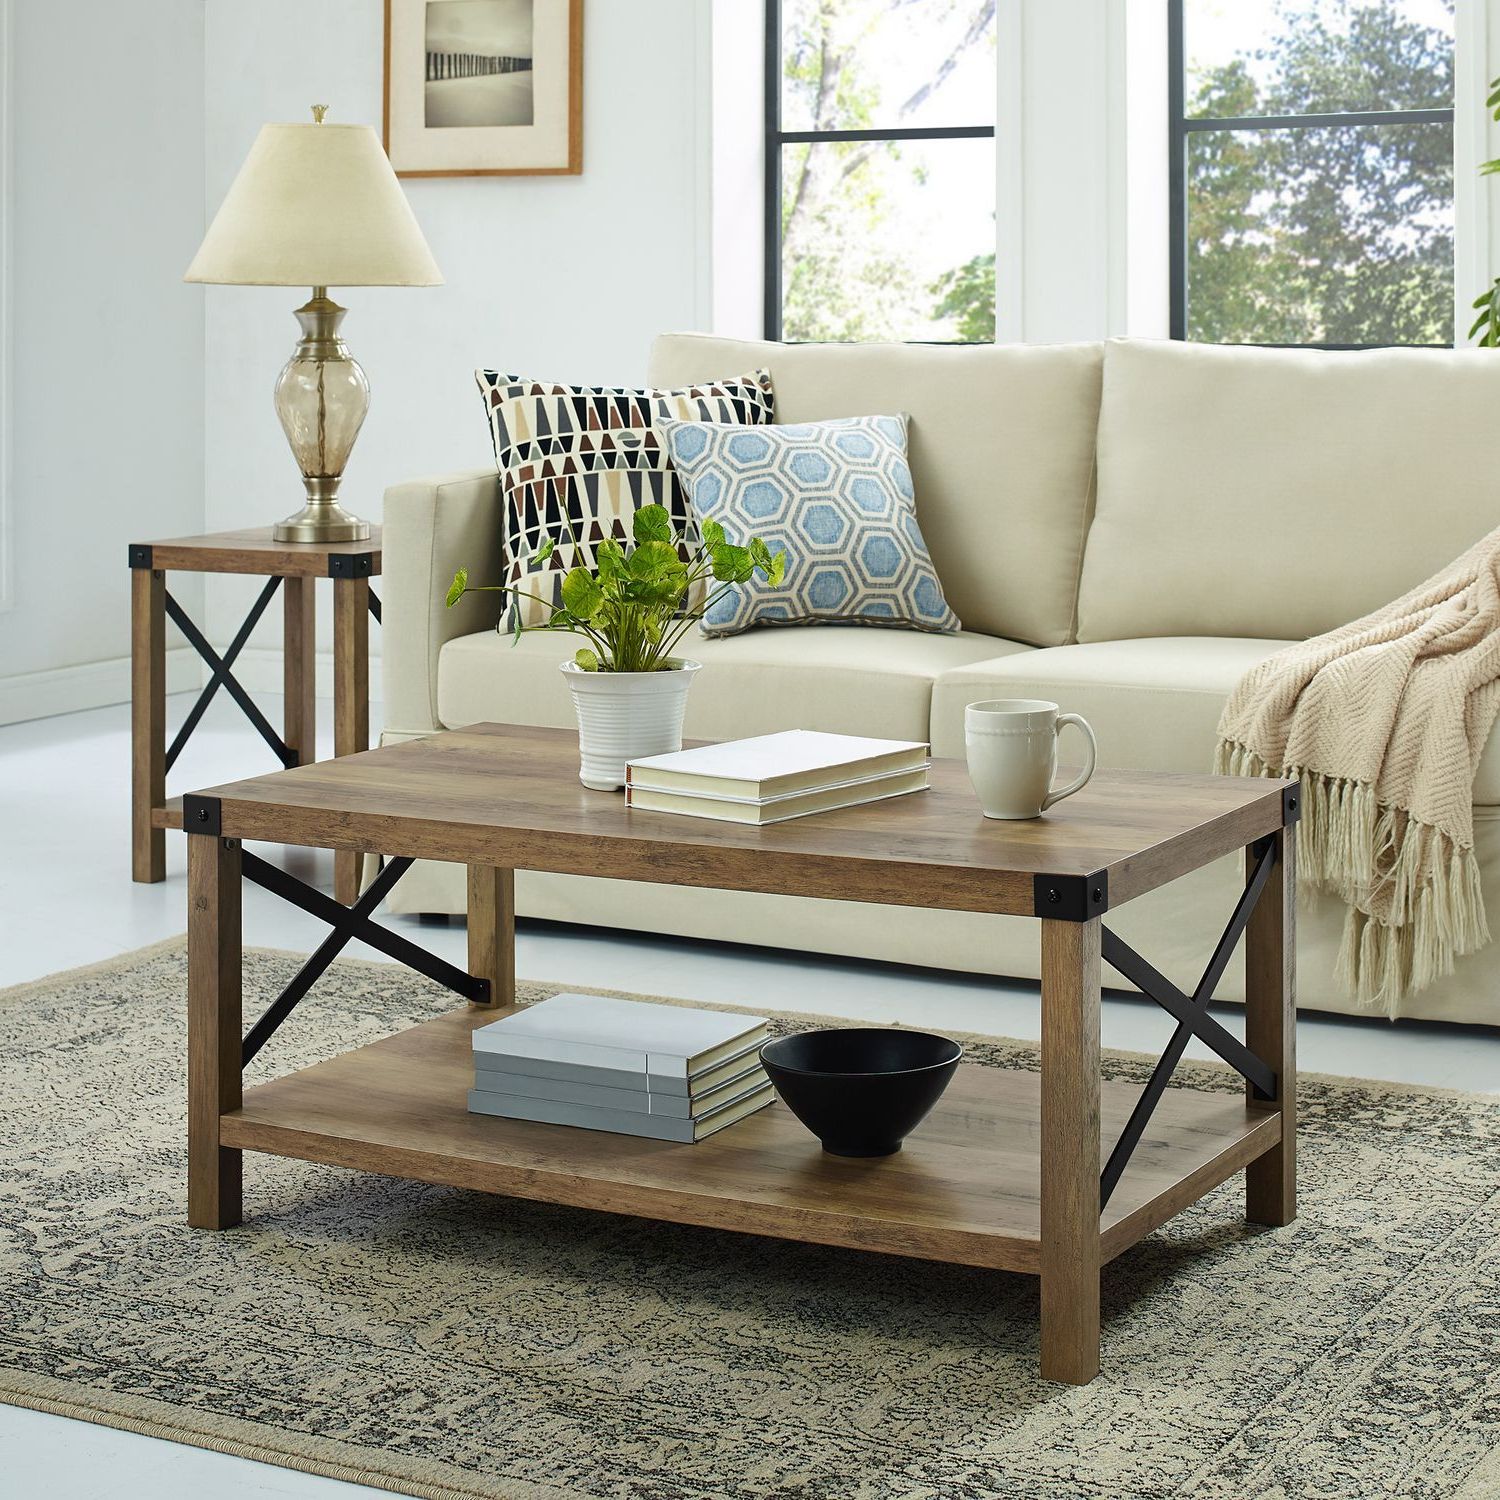 22+ Farmhouse Style Coffee Tables For Sale Joplin Mo Pittsburg Ks – 12 For Most Recently Released Living Room Farmhouse Coffee Tables (View 11 of 15)